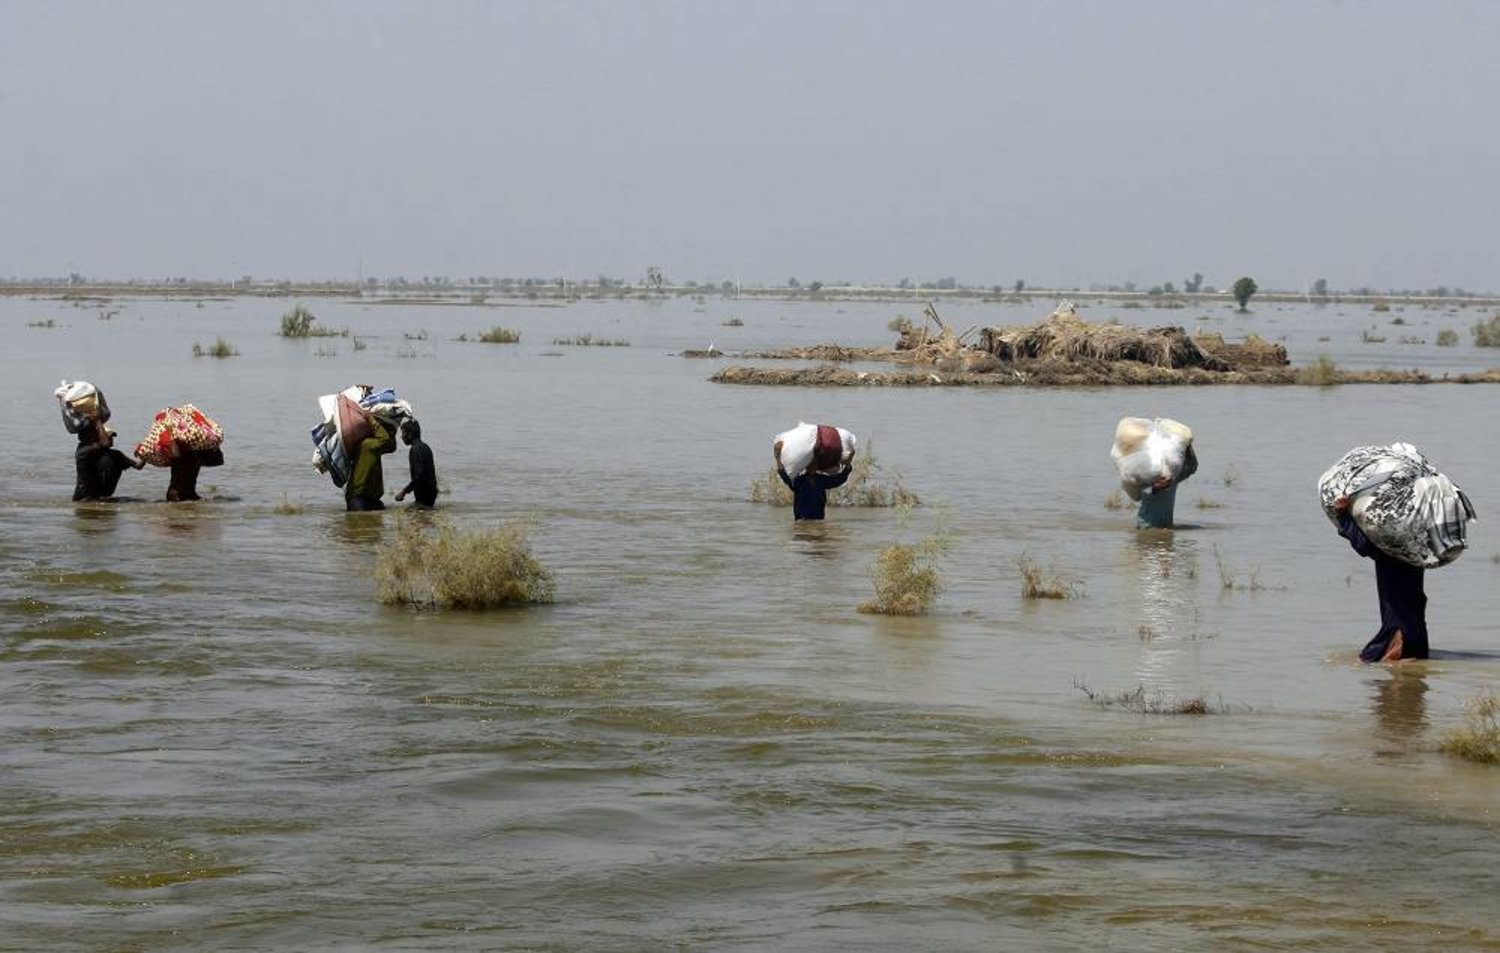 Victims of heavy flooding from monsoon rains carry relief aid through flood water in the Qambar Shahdadkot district of Sindh Province, Pakistan, Sept. 9, 2022. (AP)